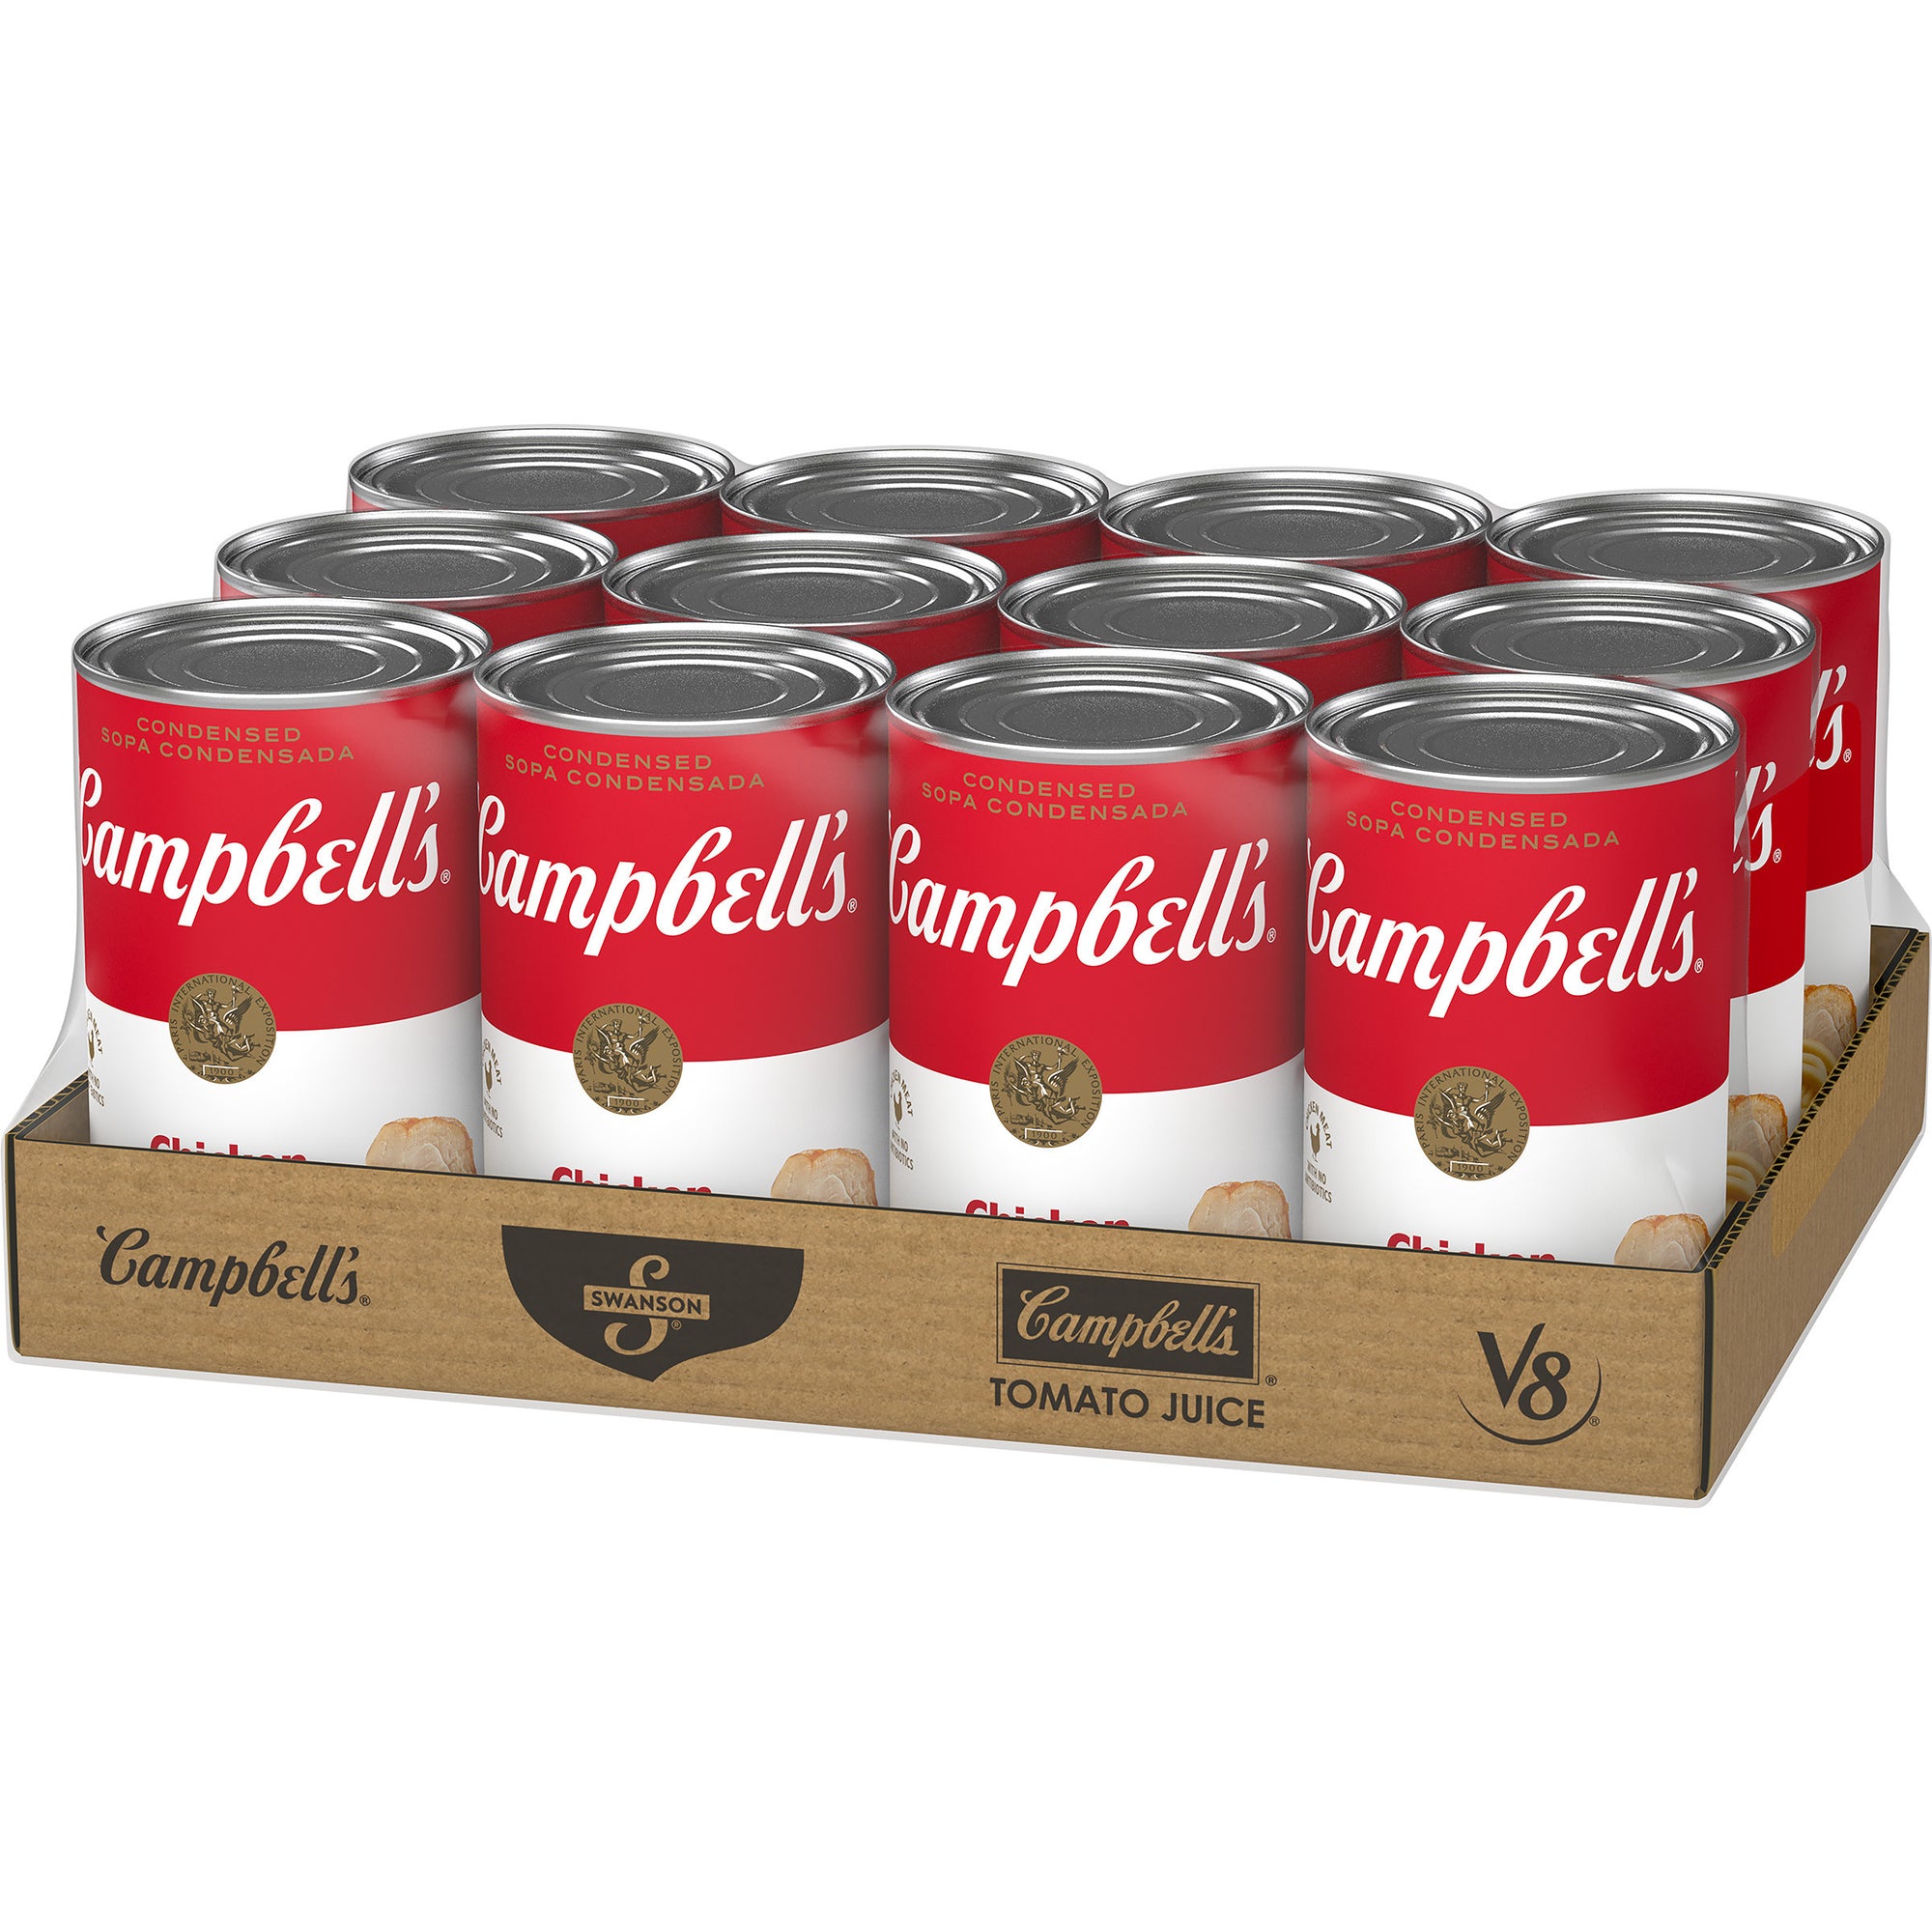 CAMPBELL'S CLASSIC CHICKEN NOODLE CONDENSED SHELF STABLE SOUP, 12 - 50 OZ